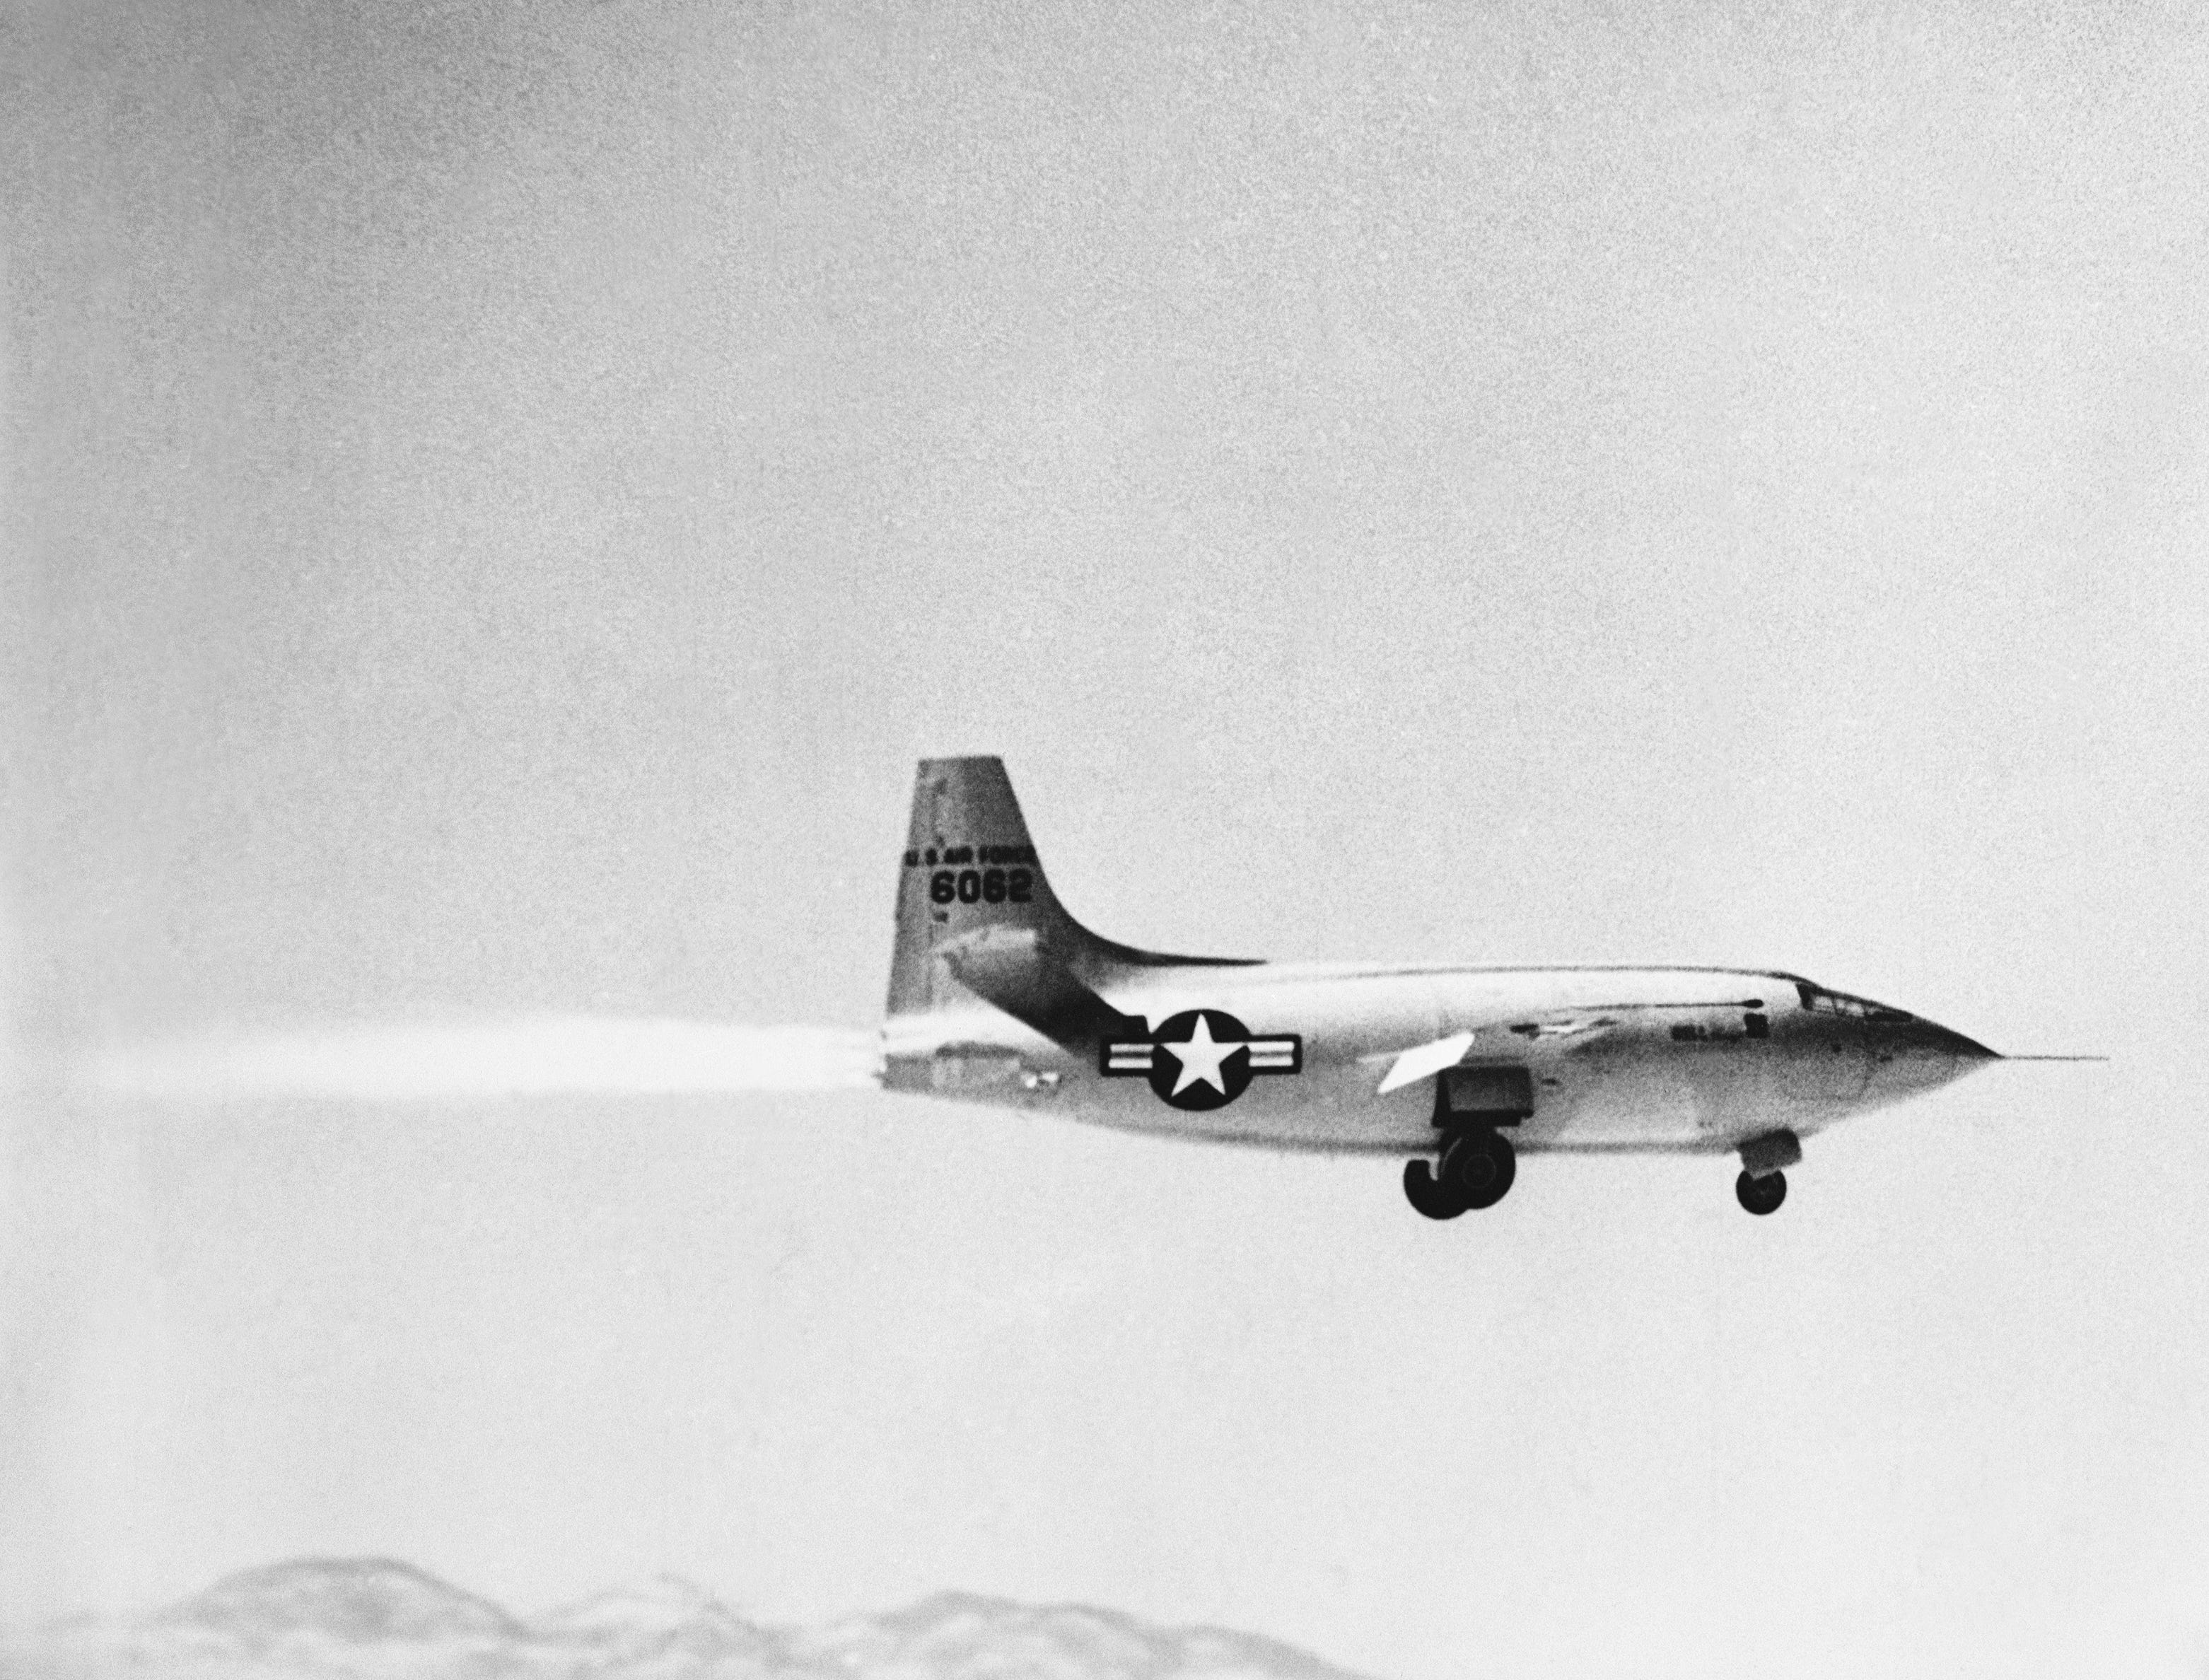 <p>In 1947, the <a href="https://www.businessinsider.com/70-years-since-chuck-yeager-broke-the-sound-barrier-what-it-was-like-2017-10">Bell X-1 became the first airplane in the world to fly faster than the speed of sound</a>, soaring over the Mojave Desert, which is designated for special flight use and has a 50-mile supersonic corridor used for Mach speed flight tests over land.</p><p>Other famous planes that took off from the Mojave include a rocket-powered experimental jet called the North American X-15. According to the <a href="https://www.si.edu/object/north-american-x-15%3Anasm_A19690360000">Smithsonian</a>, it was the first winged aircraft to fly four, five, and six times the speed of sound.</p>